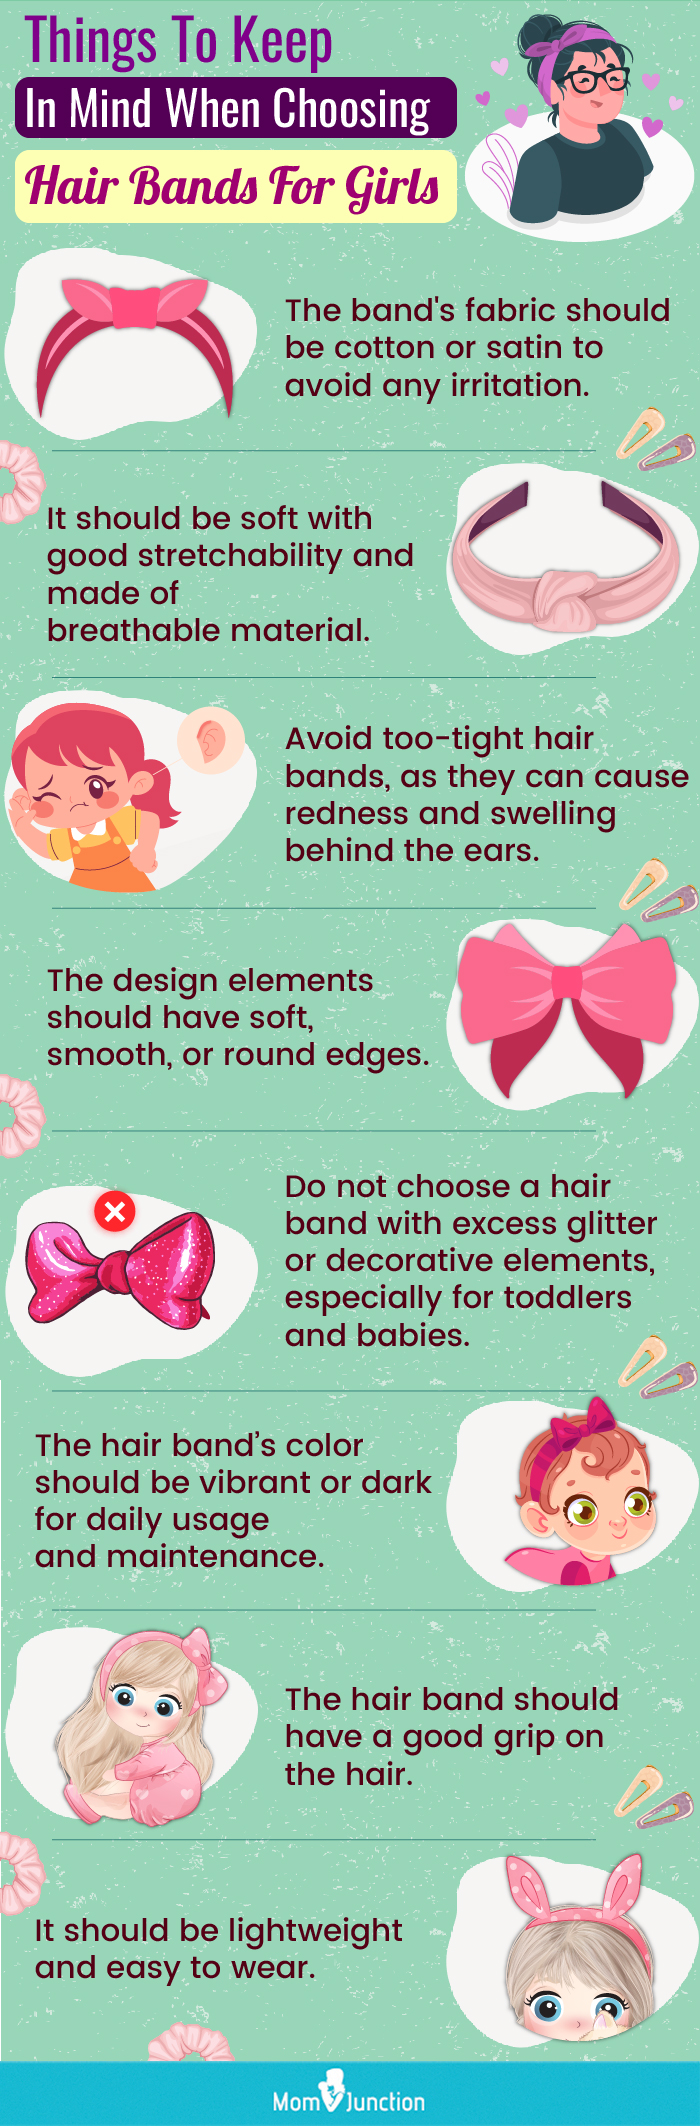 Things To Keep In Mind When Choosing Hair Bands For Girls (infographic)